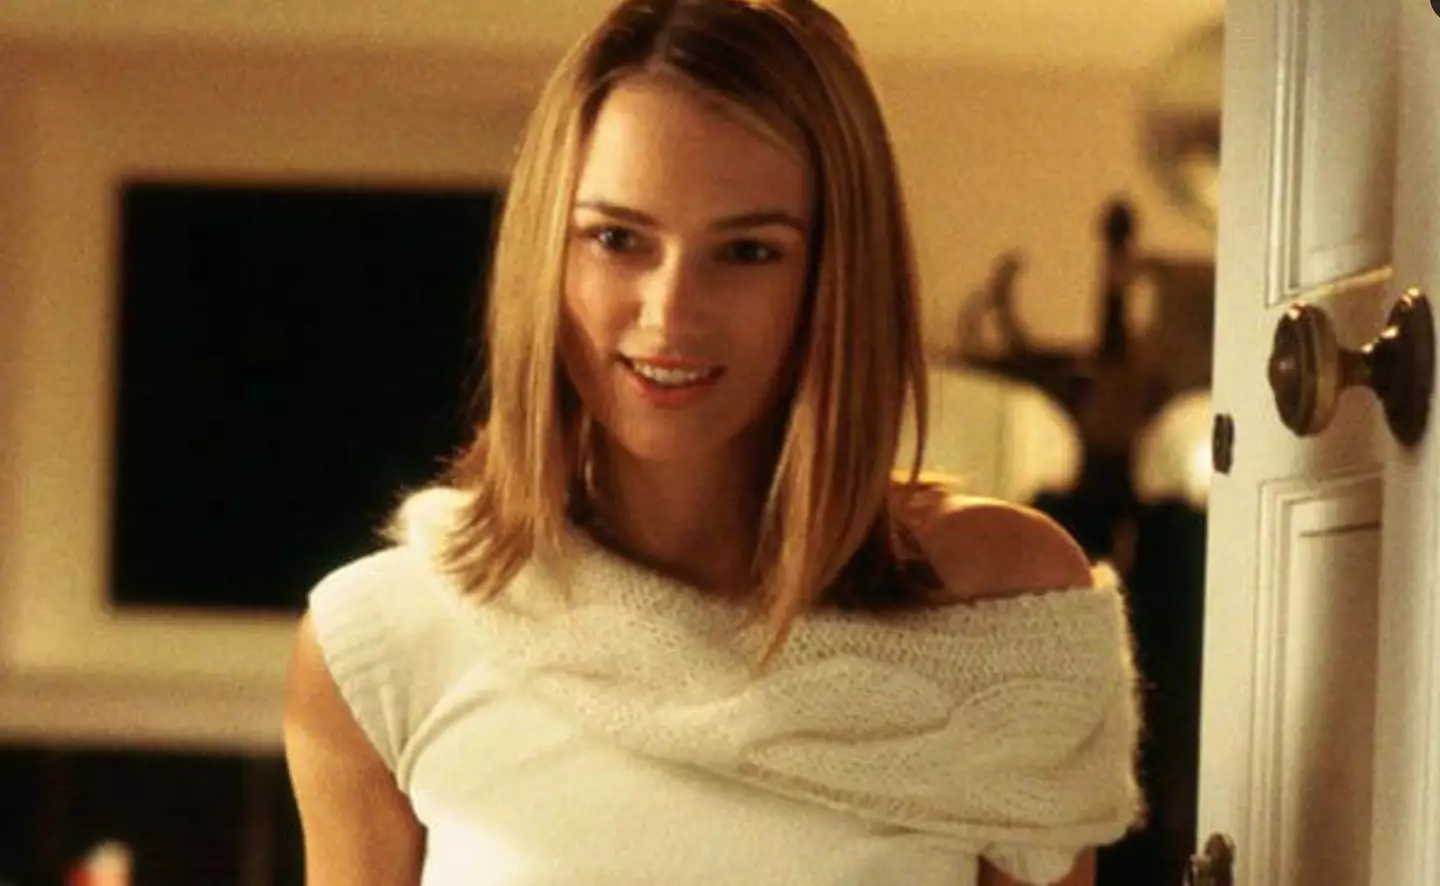 Keira Knightley was just 18 in Love Actually.